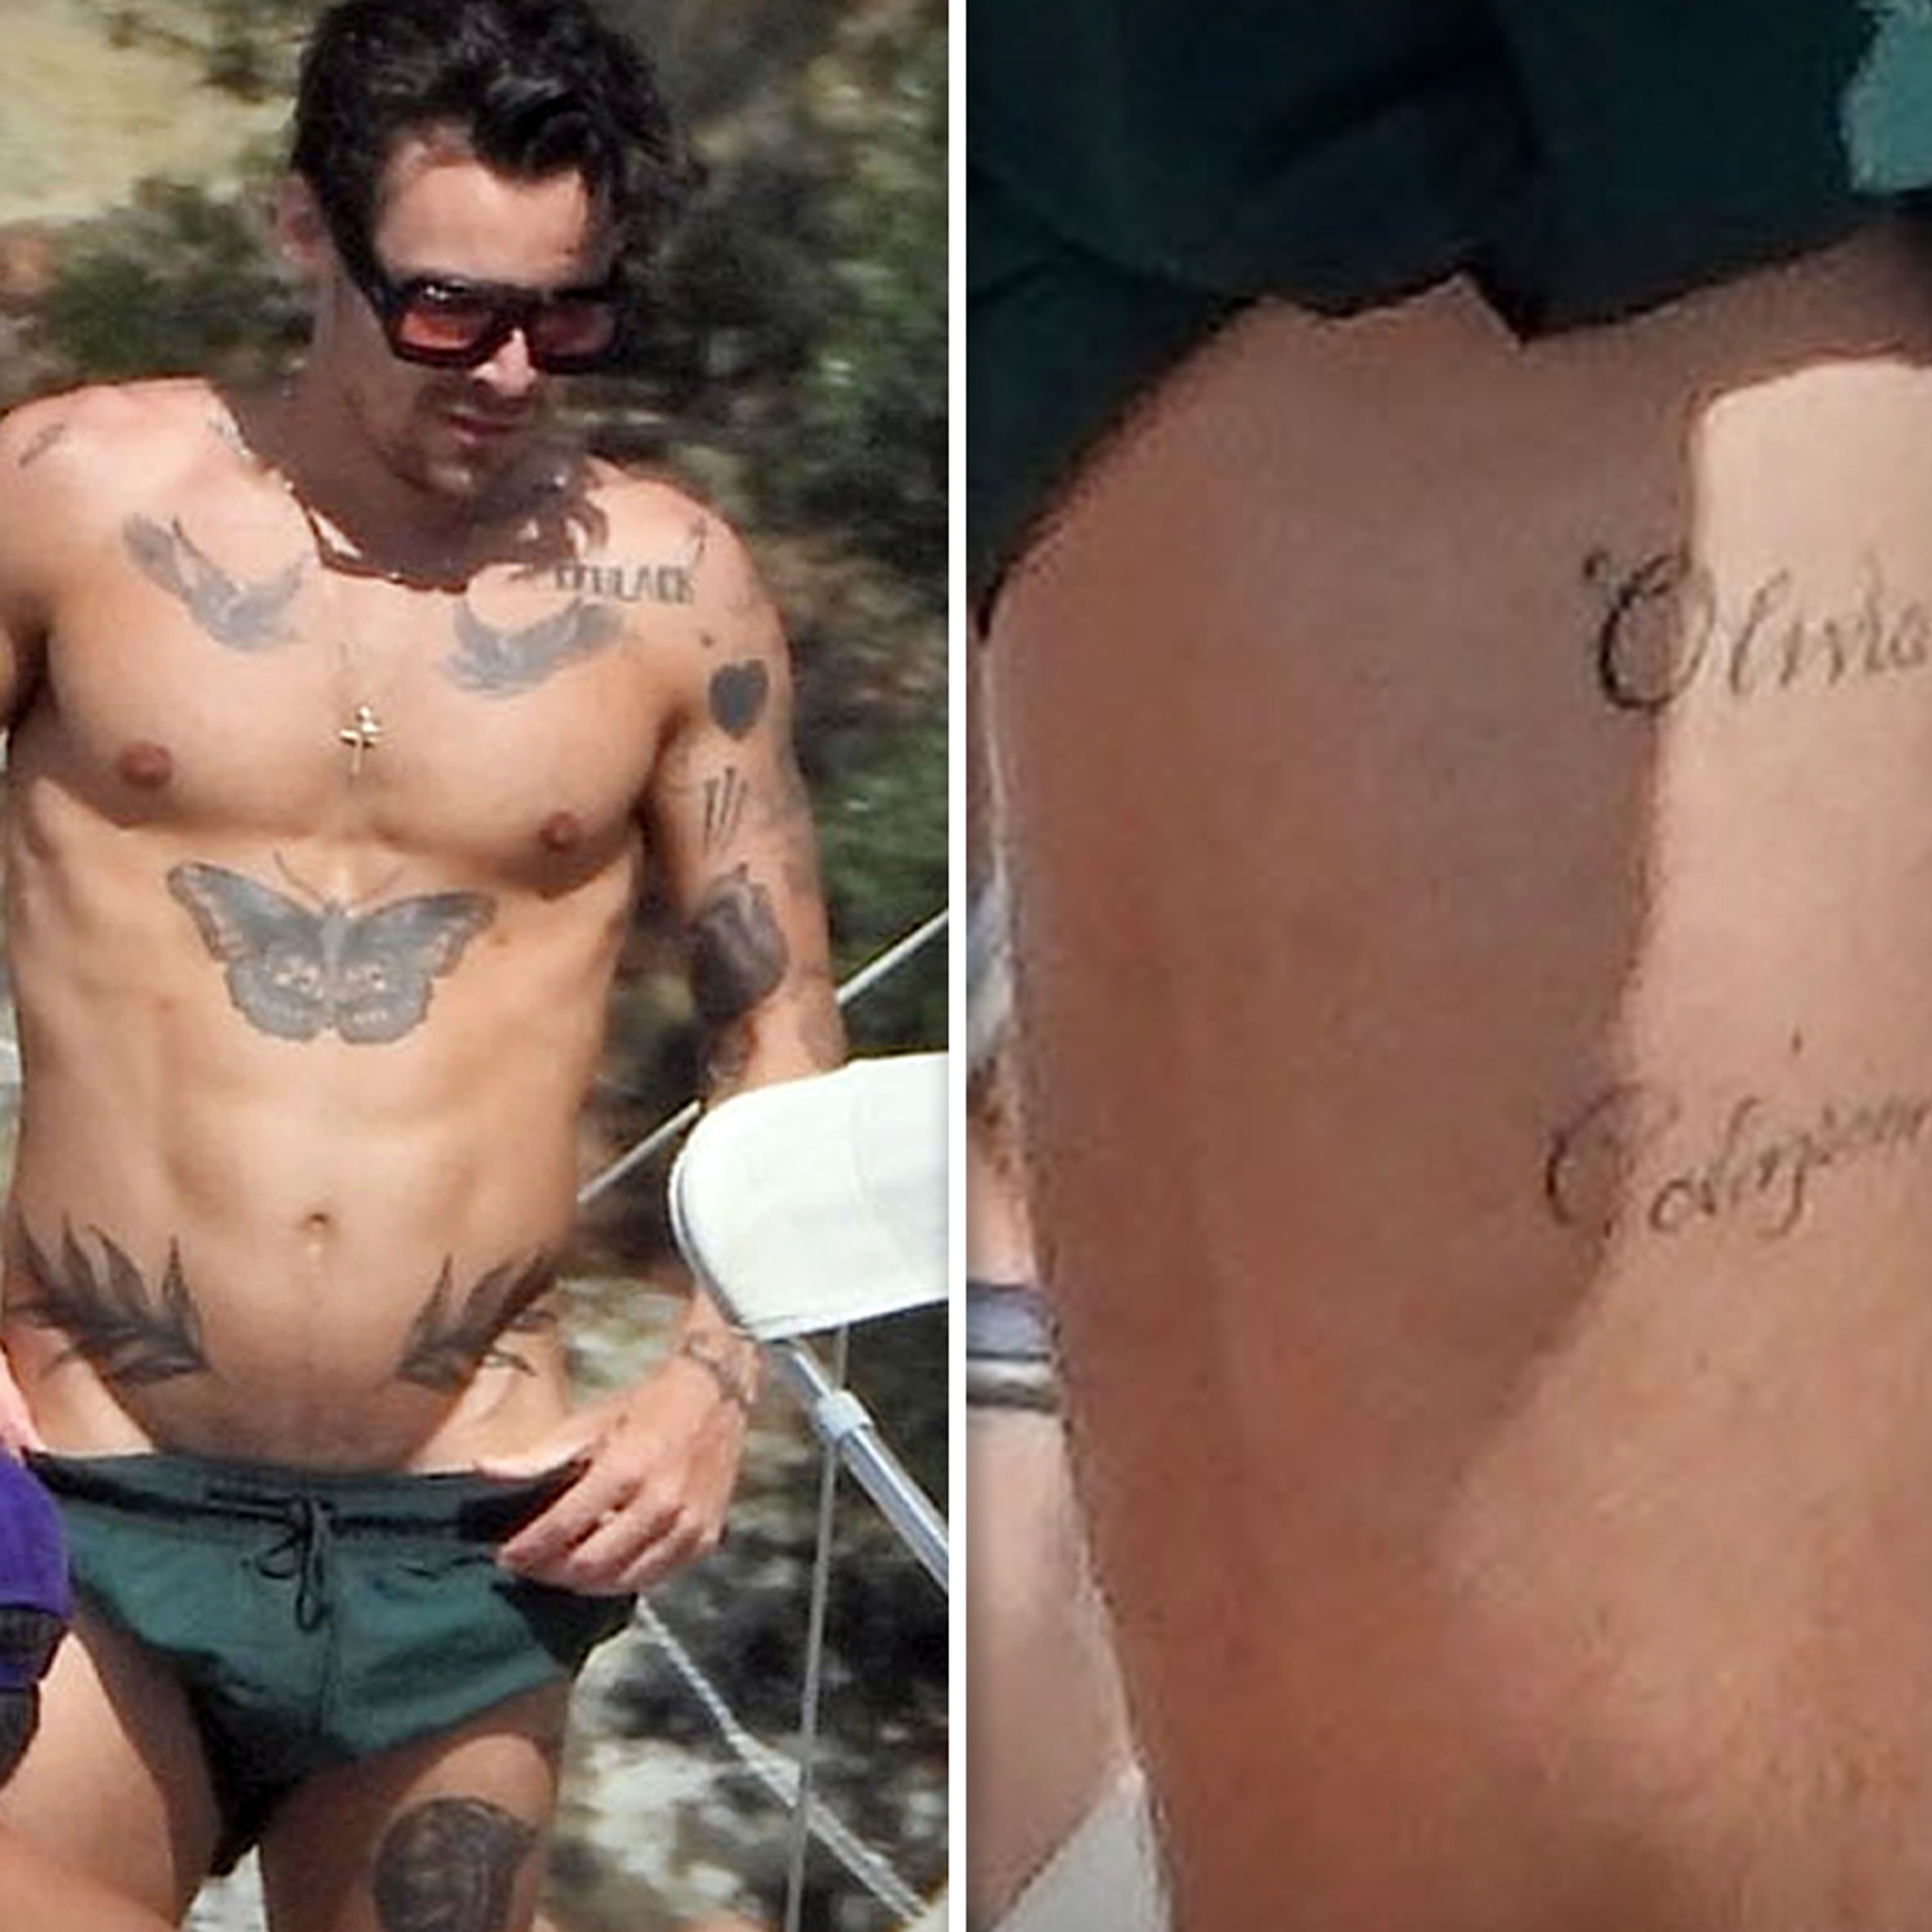 Twitpic: Hary Styles Gets Tatted